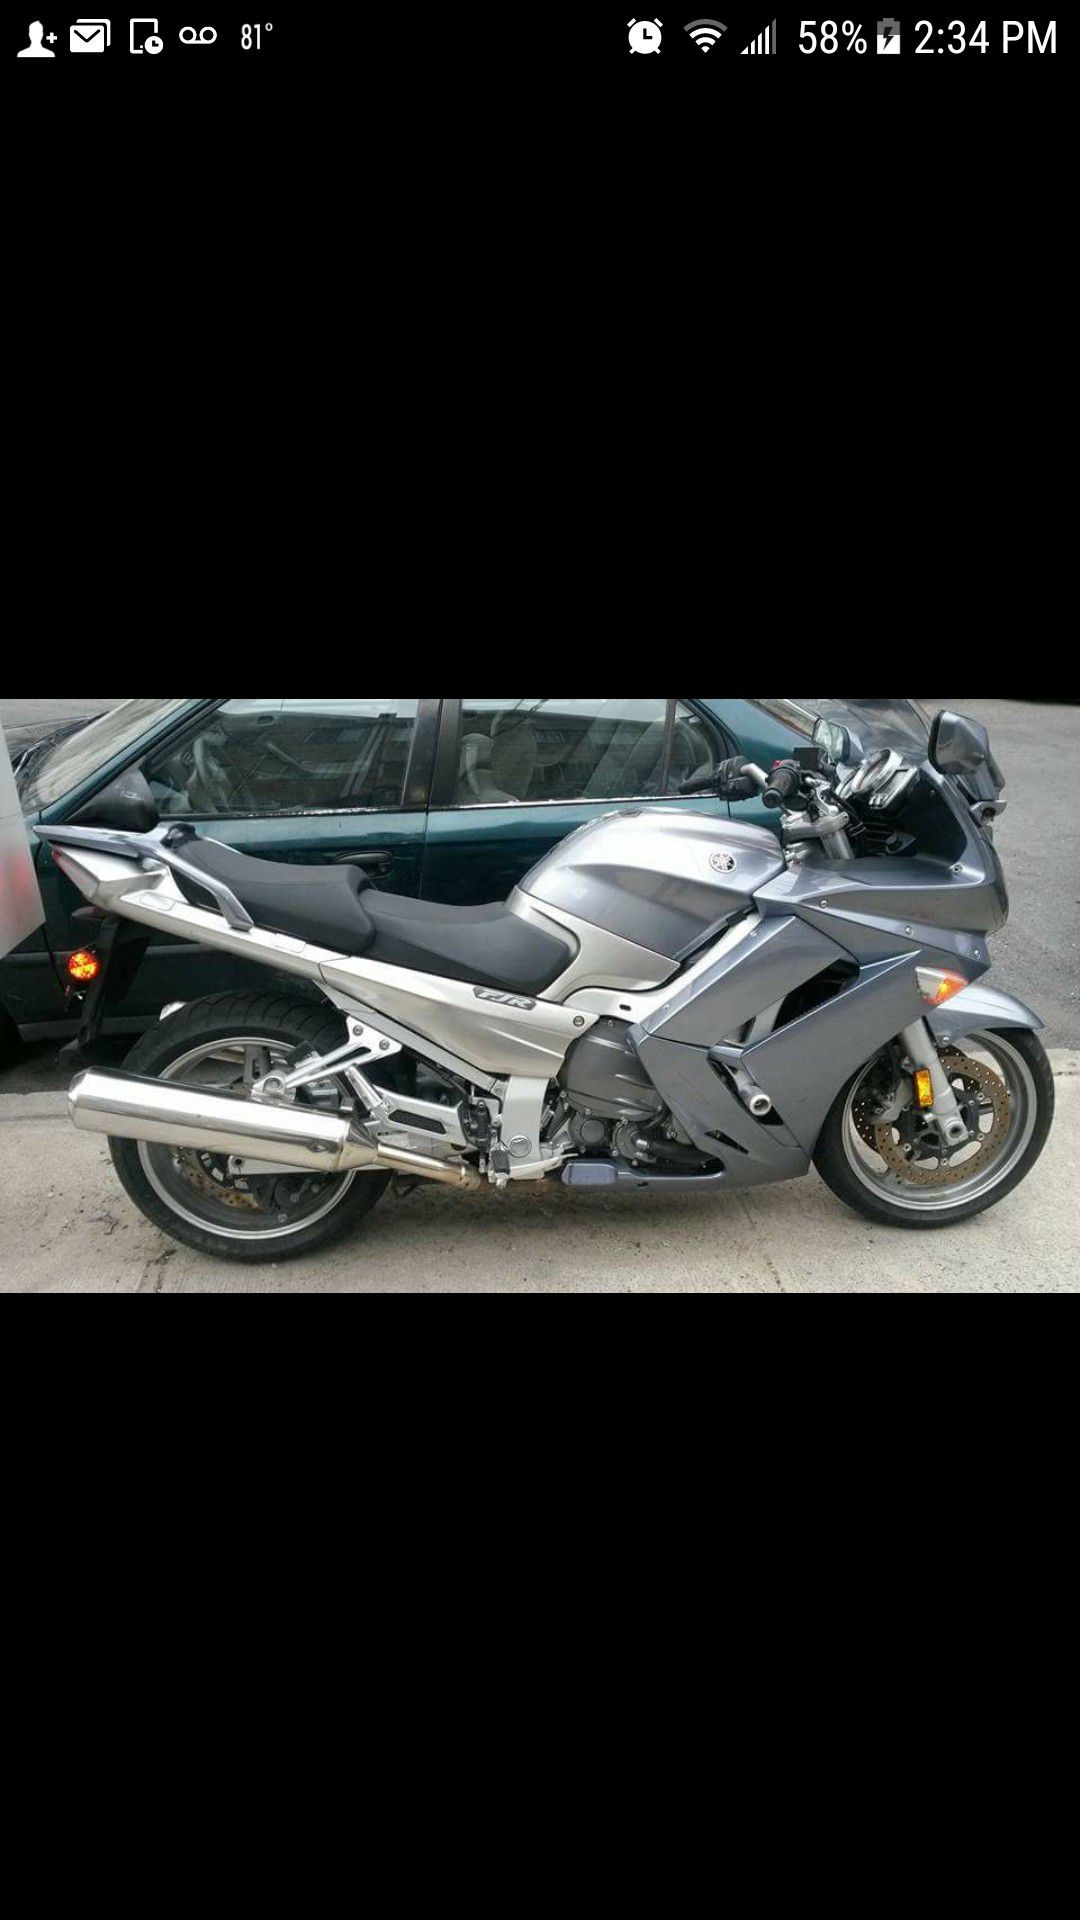 2007 FJR 1300 trade or sell